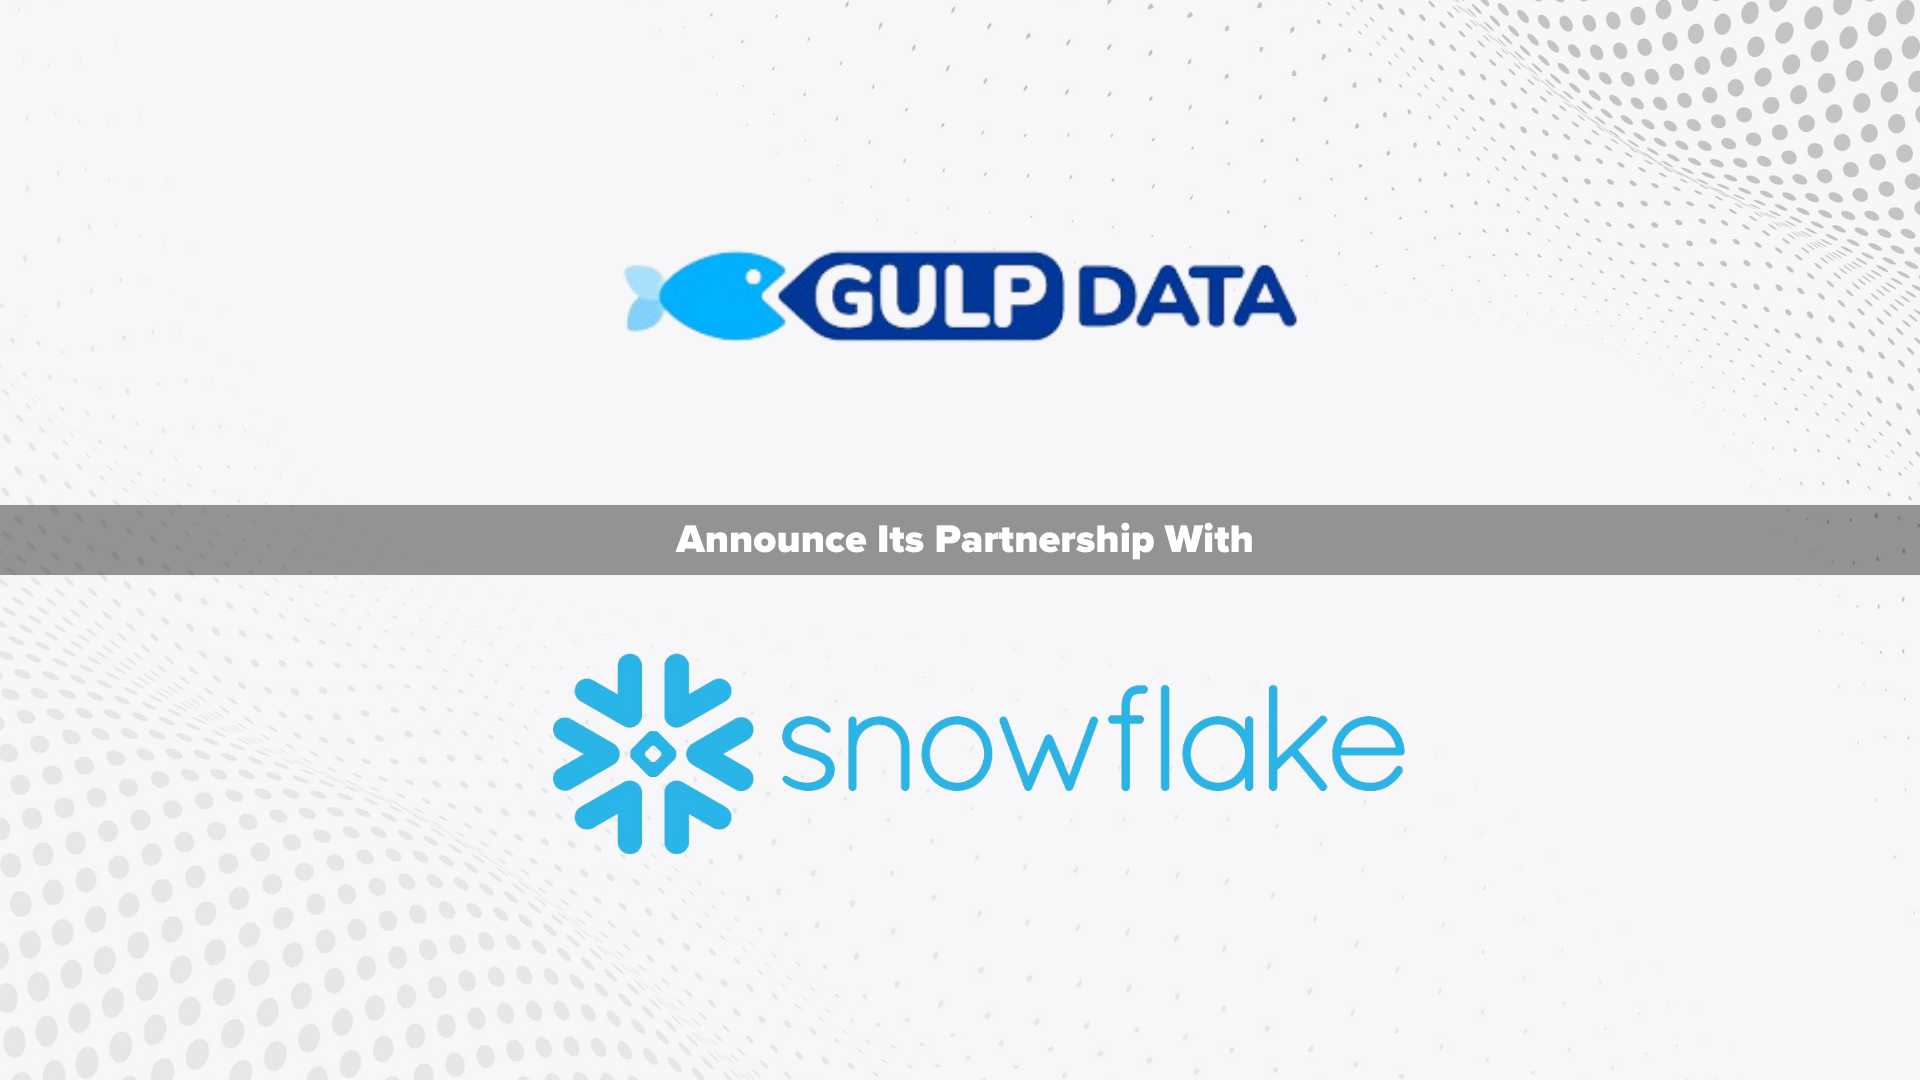 Gulp Data partners with Snowflake to help companies revolutionize their approach to data monetization